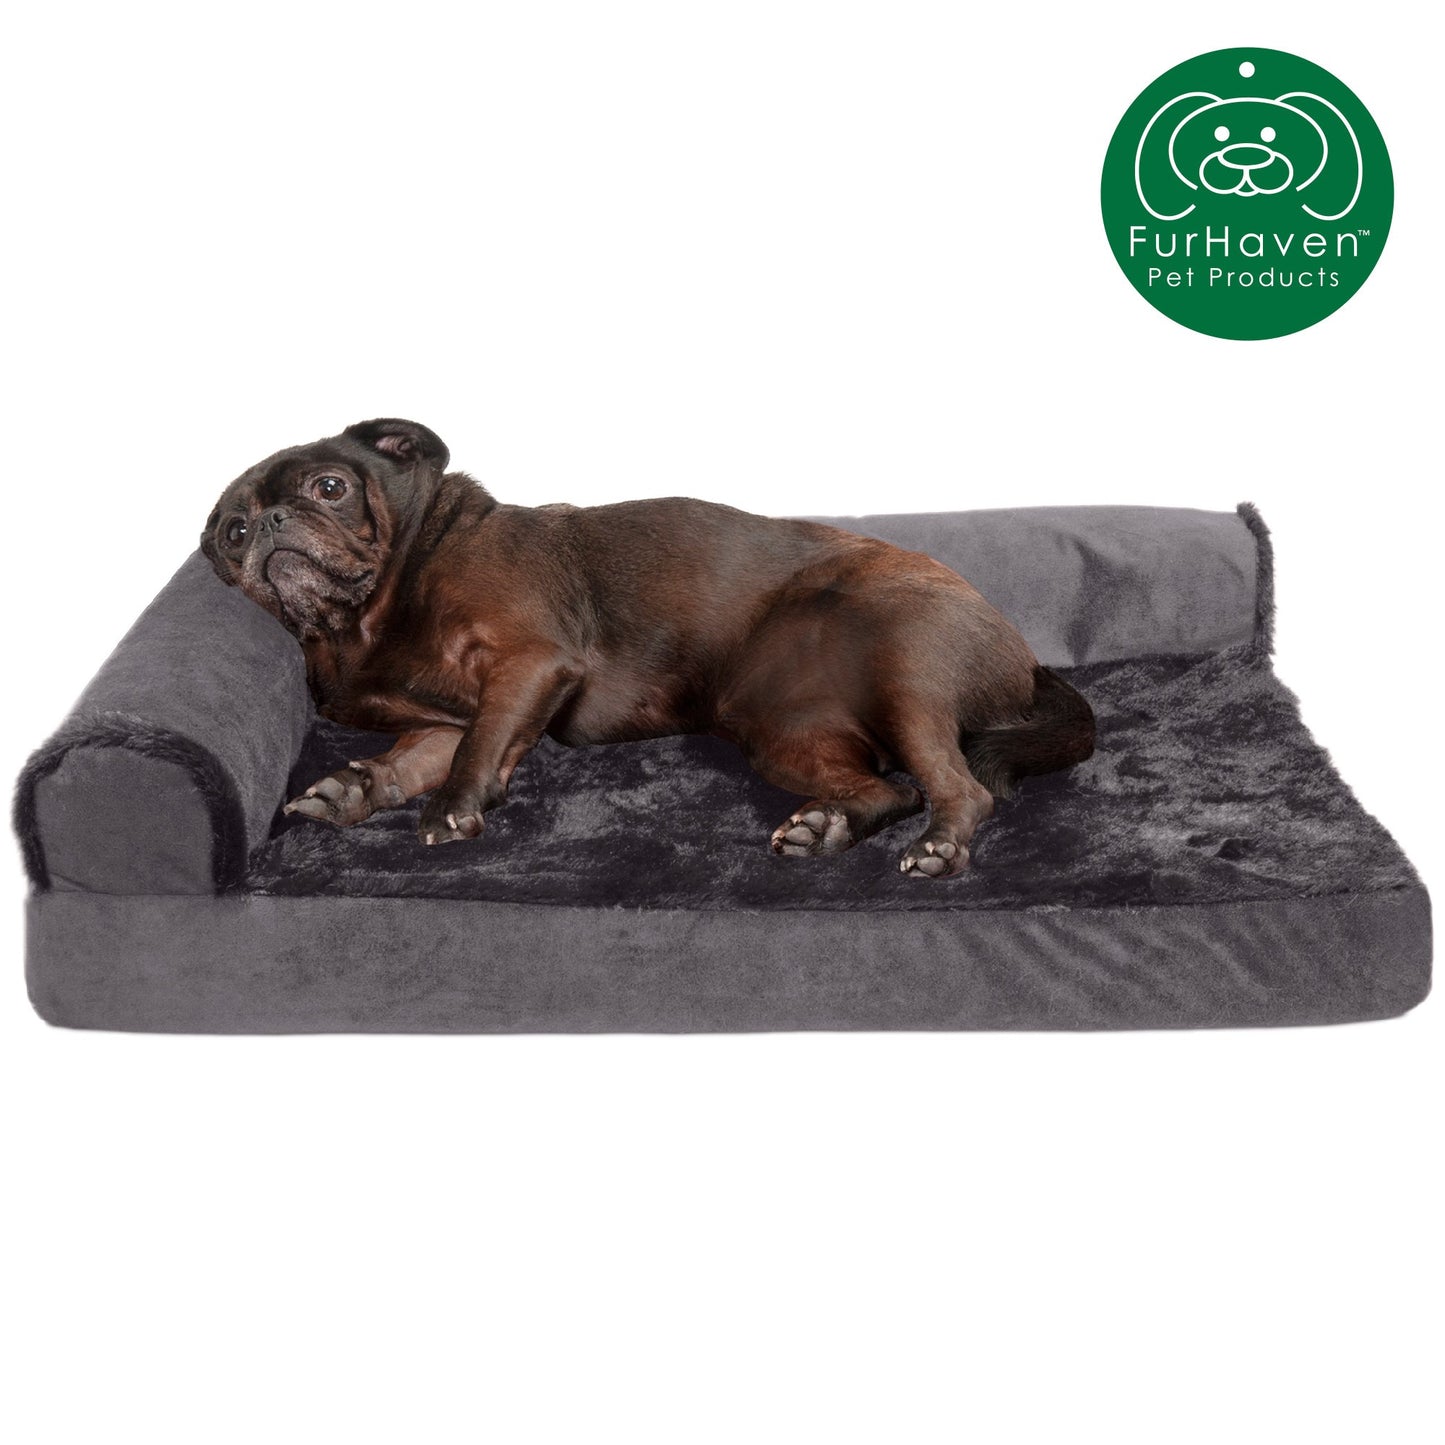 Deluxe L-Shaped Chaise Lounge for Dogs & Cats Pet Bed